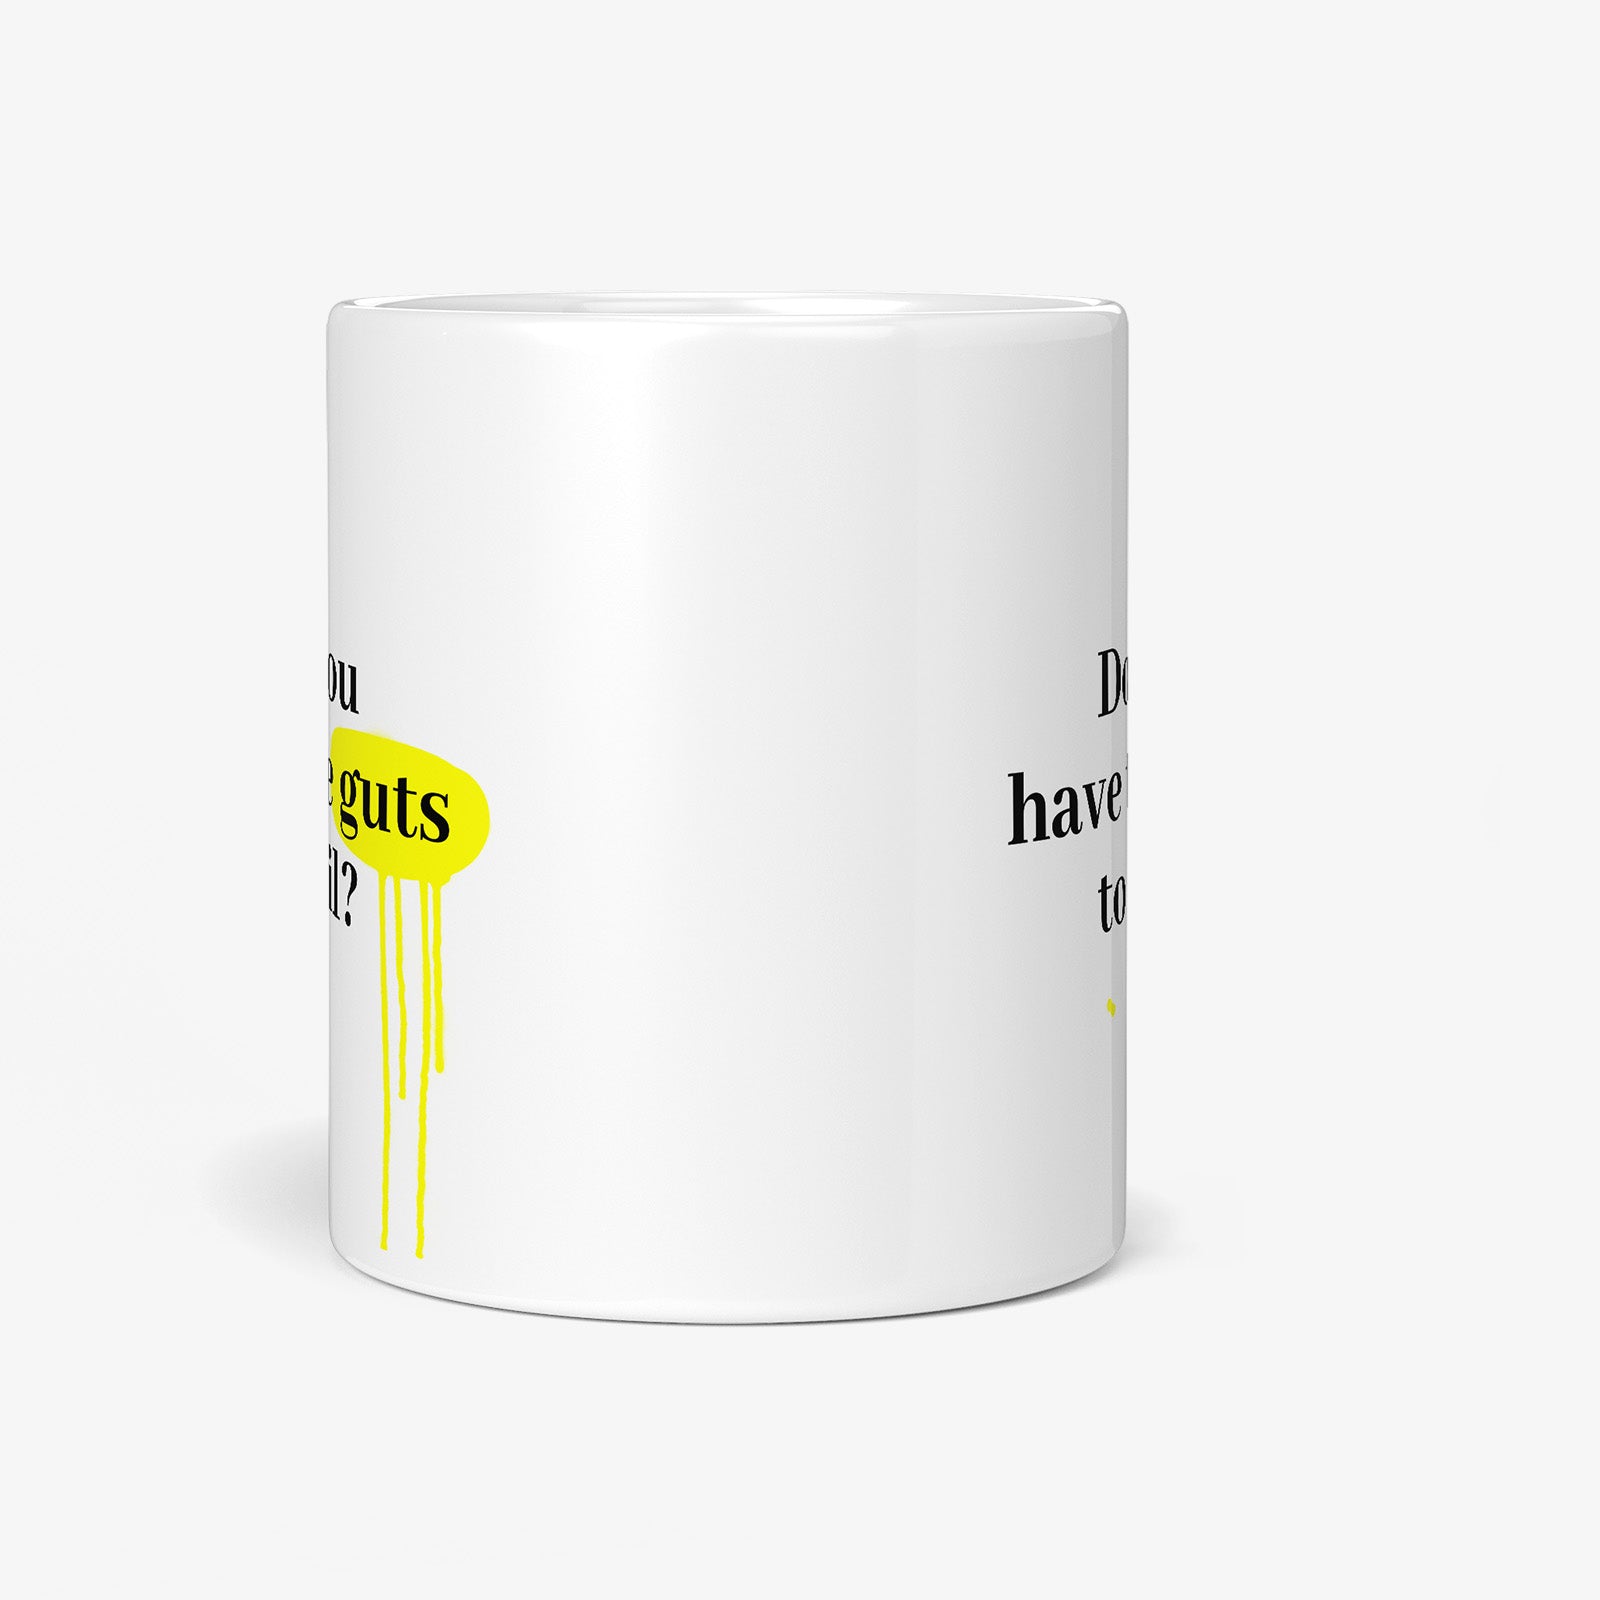 Be inspired by Denzel Washington's famous quote, "Do you have the guts to fail?" on this white and glossy 11oz coffee mug with a front view.